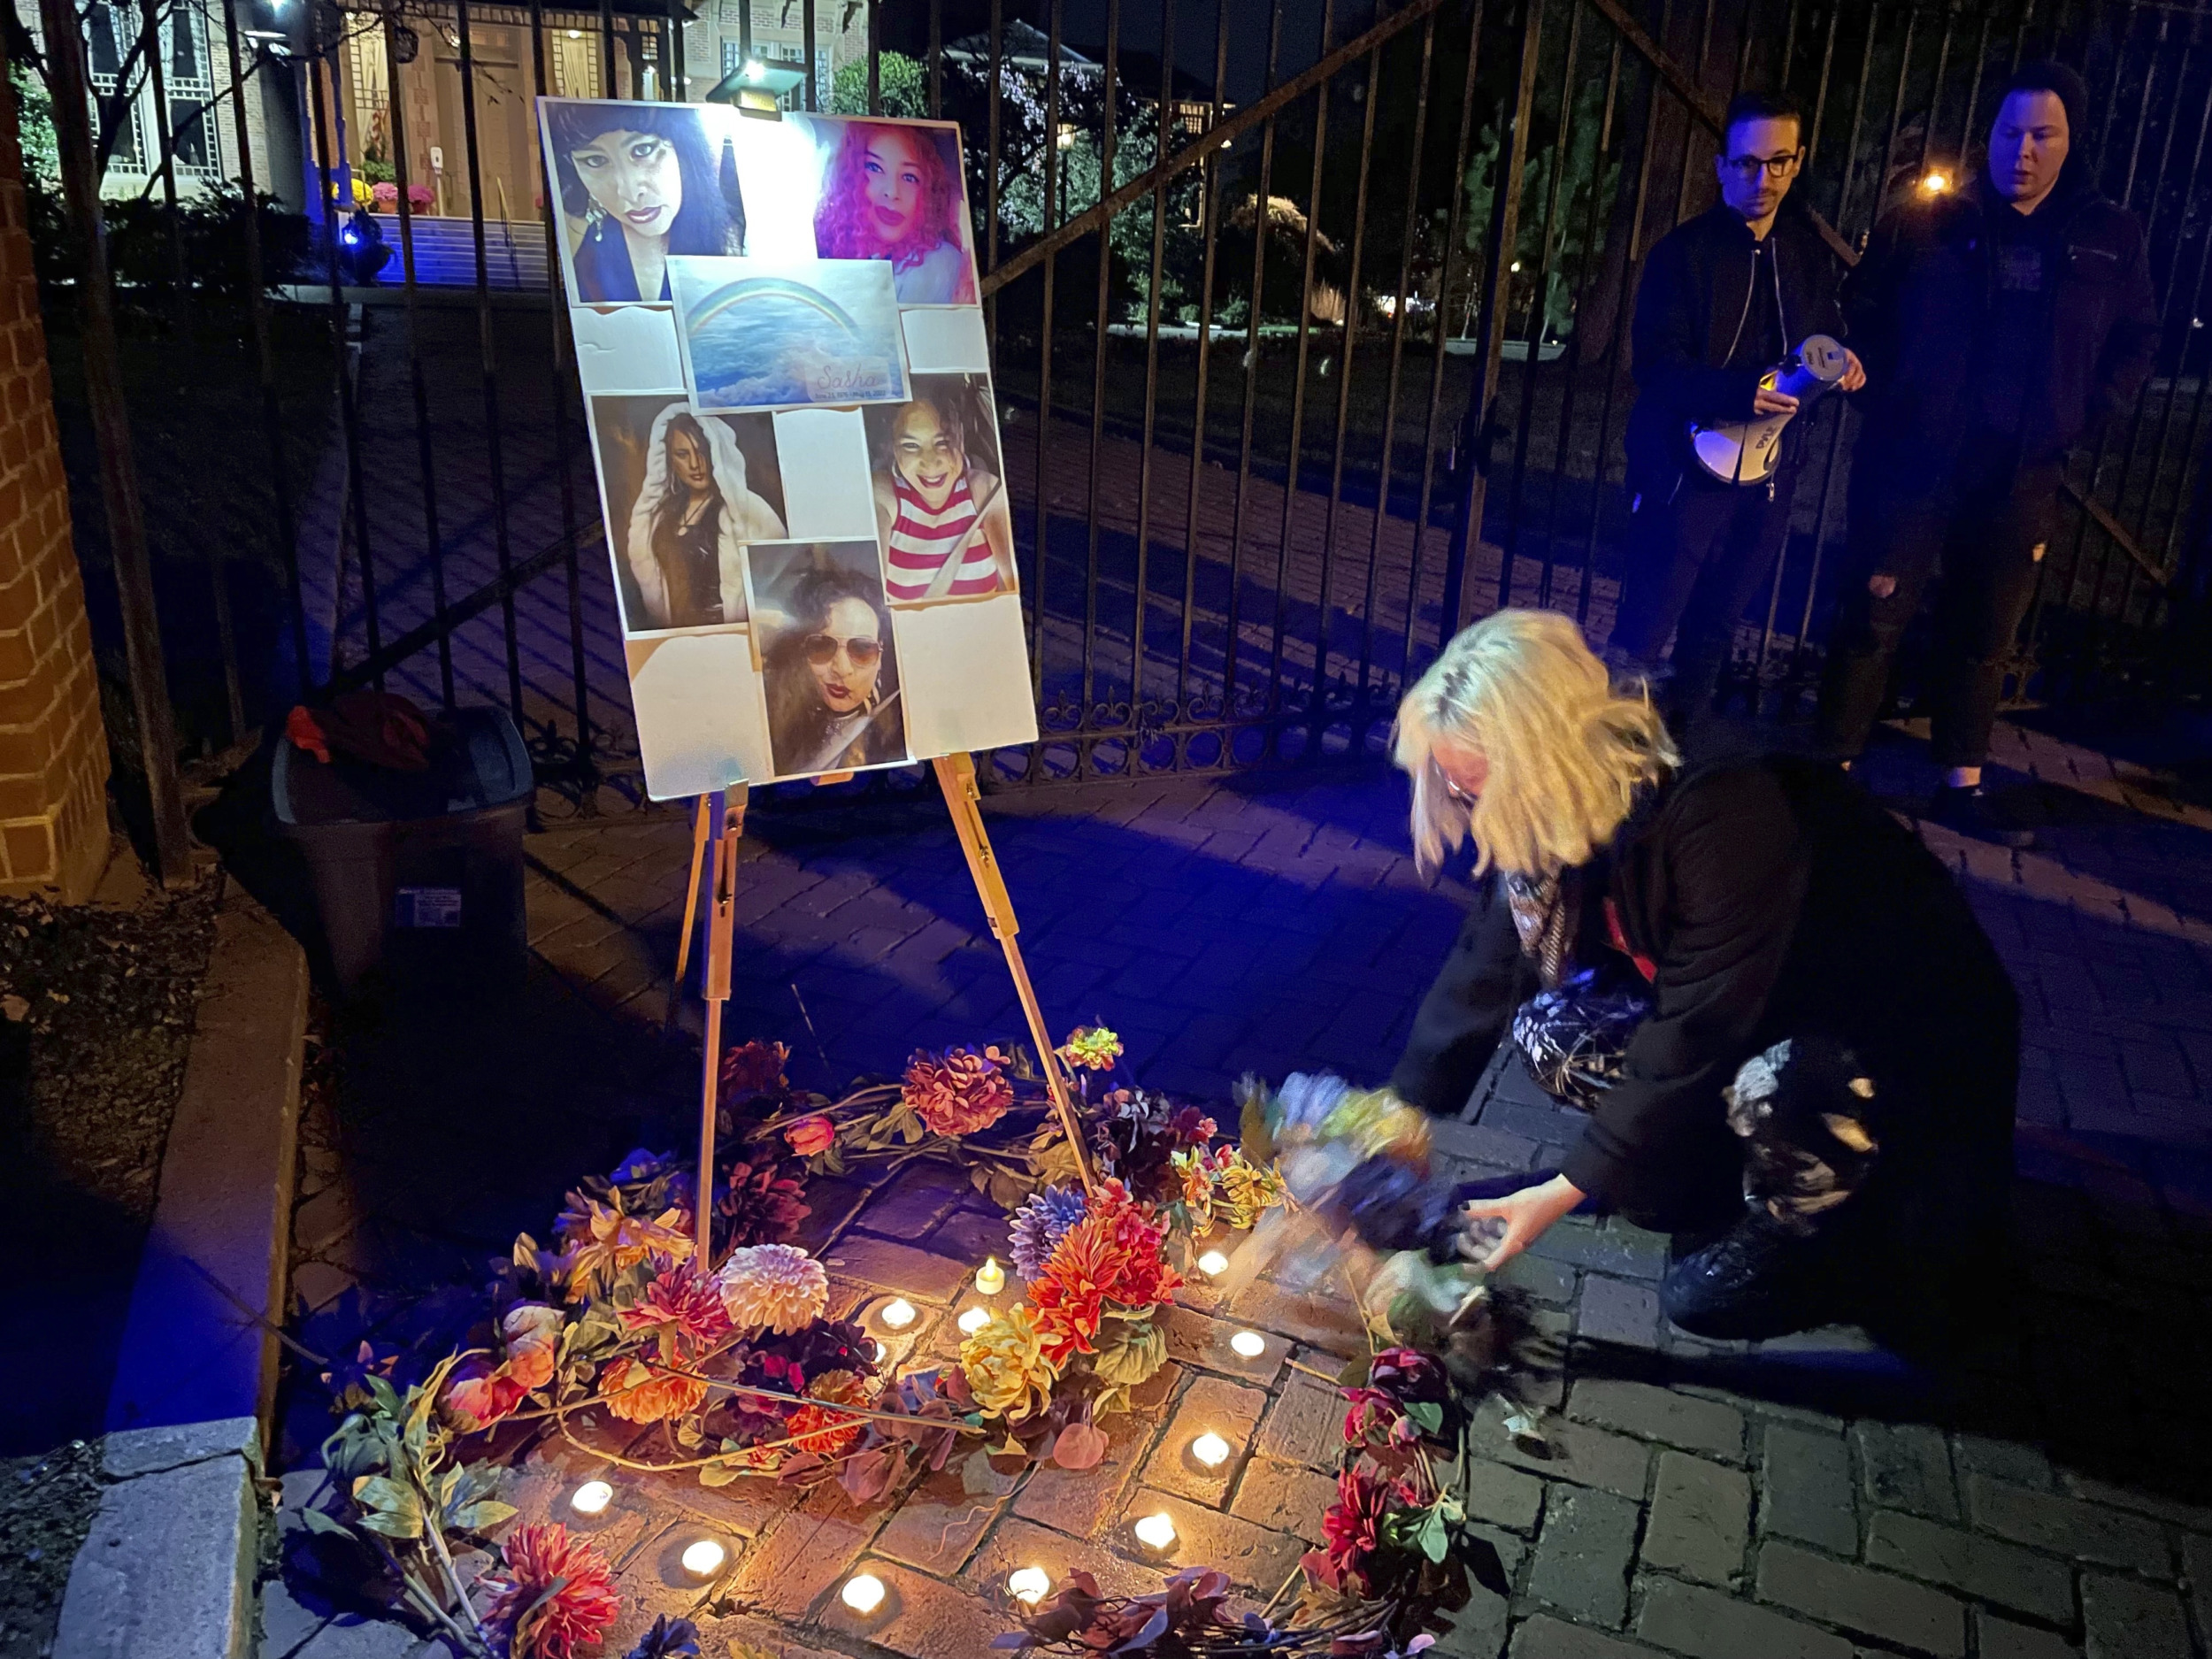 Yransgender rembrance: Oersin with white hair kneels on sidewalk next to wreath with loghts and easel with photos of 5 people